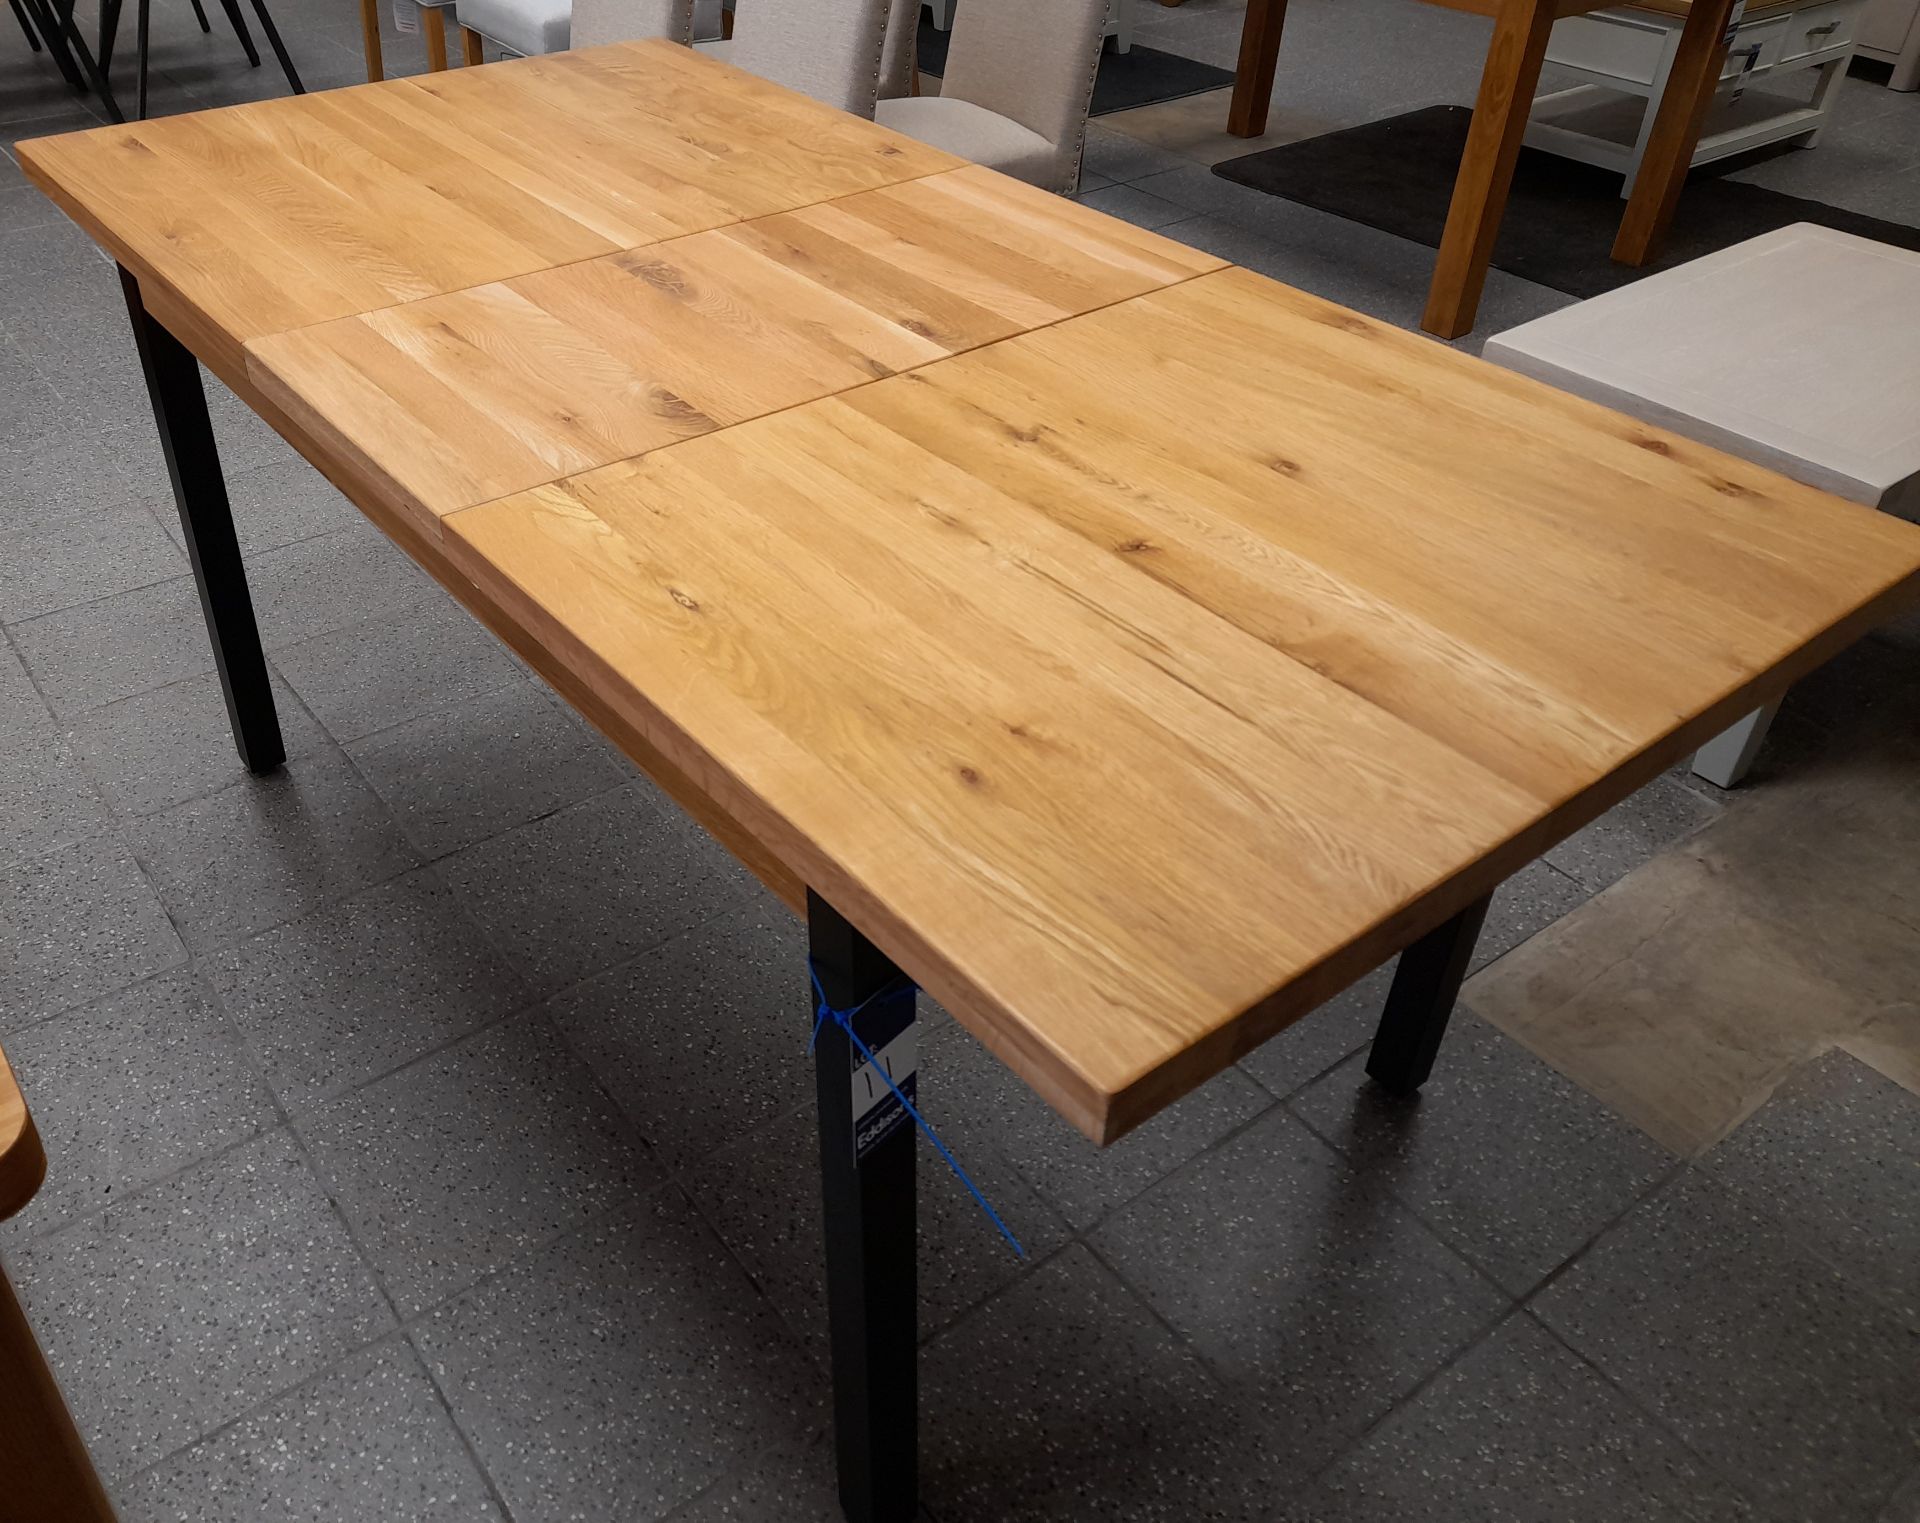 Oak topped extendable dining table Approx. 1400mm (w) x 900mm x 810mm (1800mm (w) when extended)